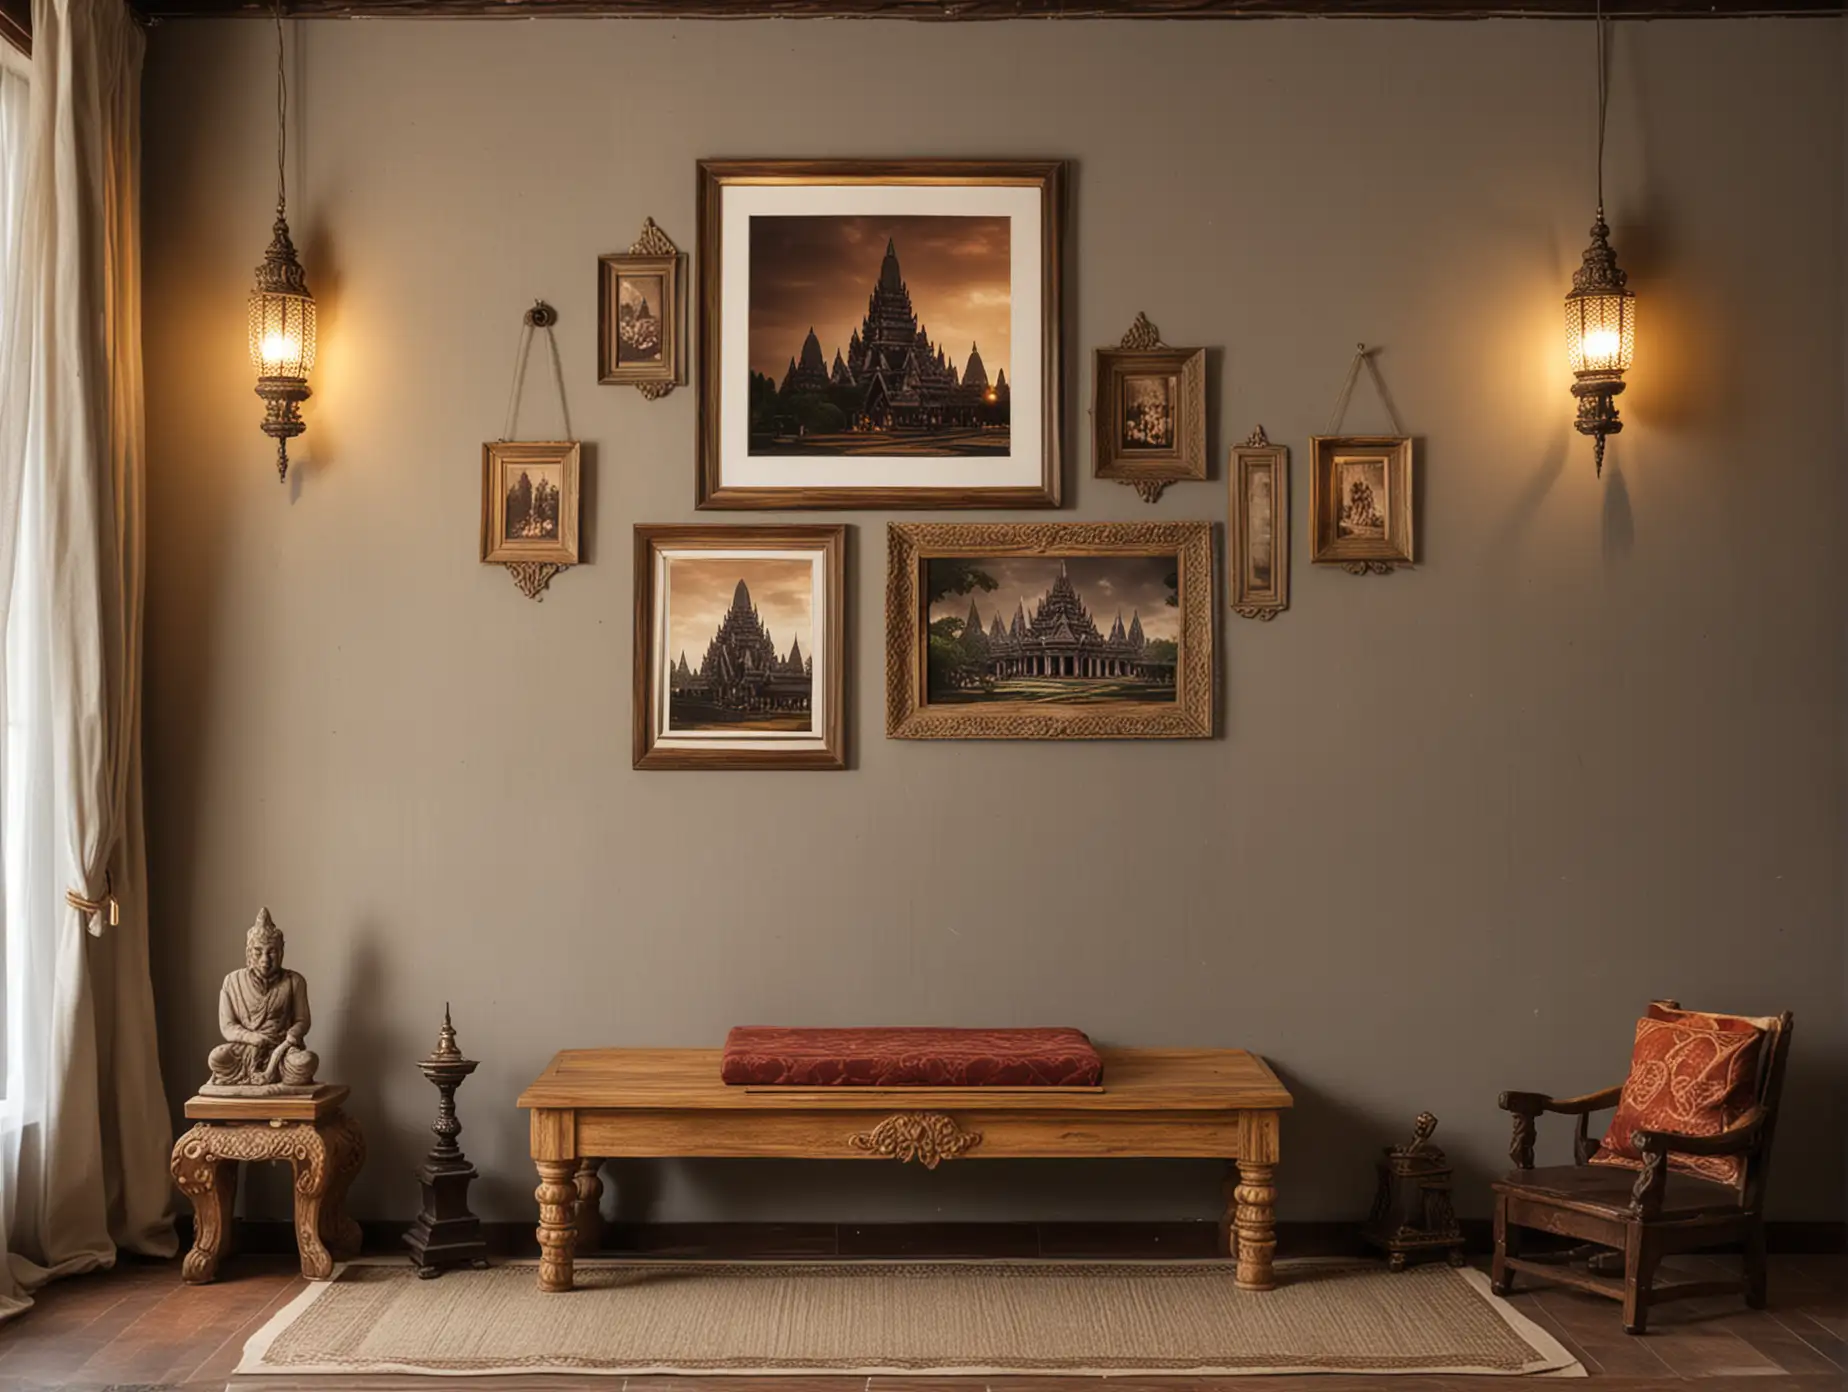 A photograph prambanan temple foto frame on the wall at Javanese traditional living room, there are wooden bench, table, lamp, etc